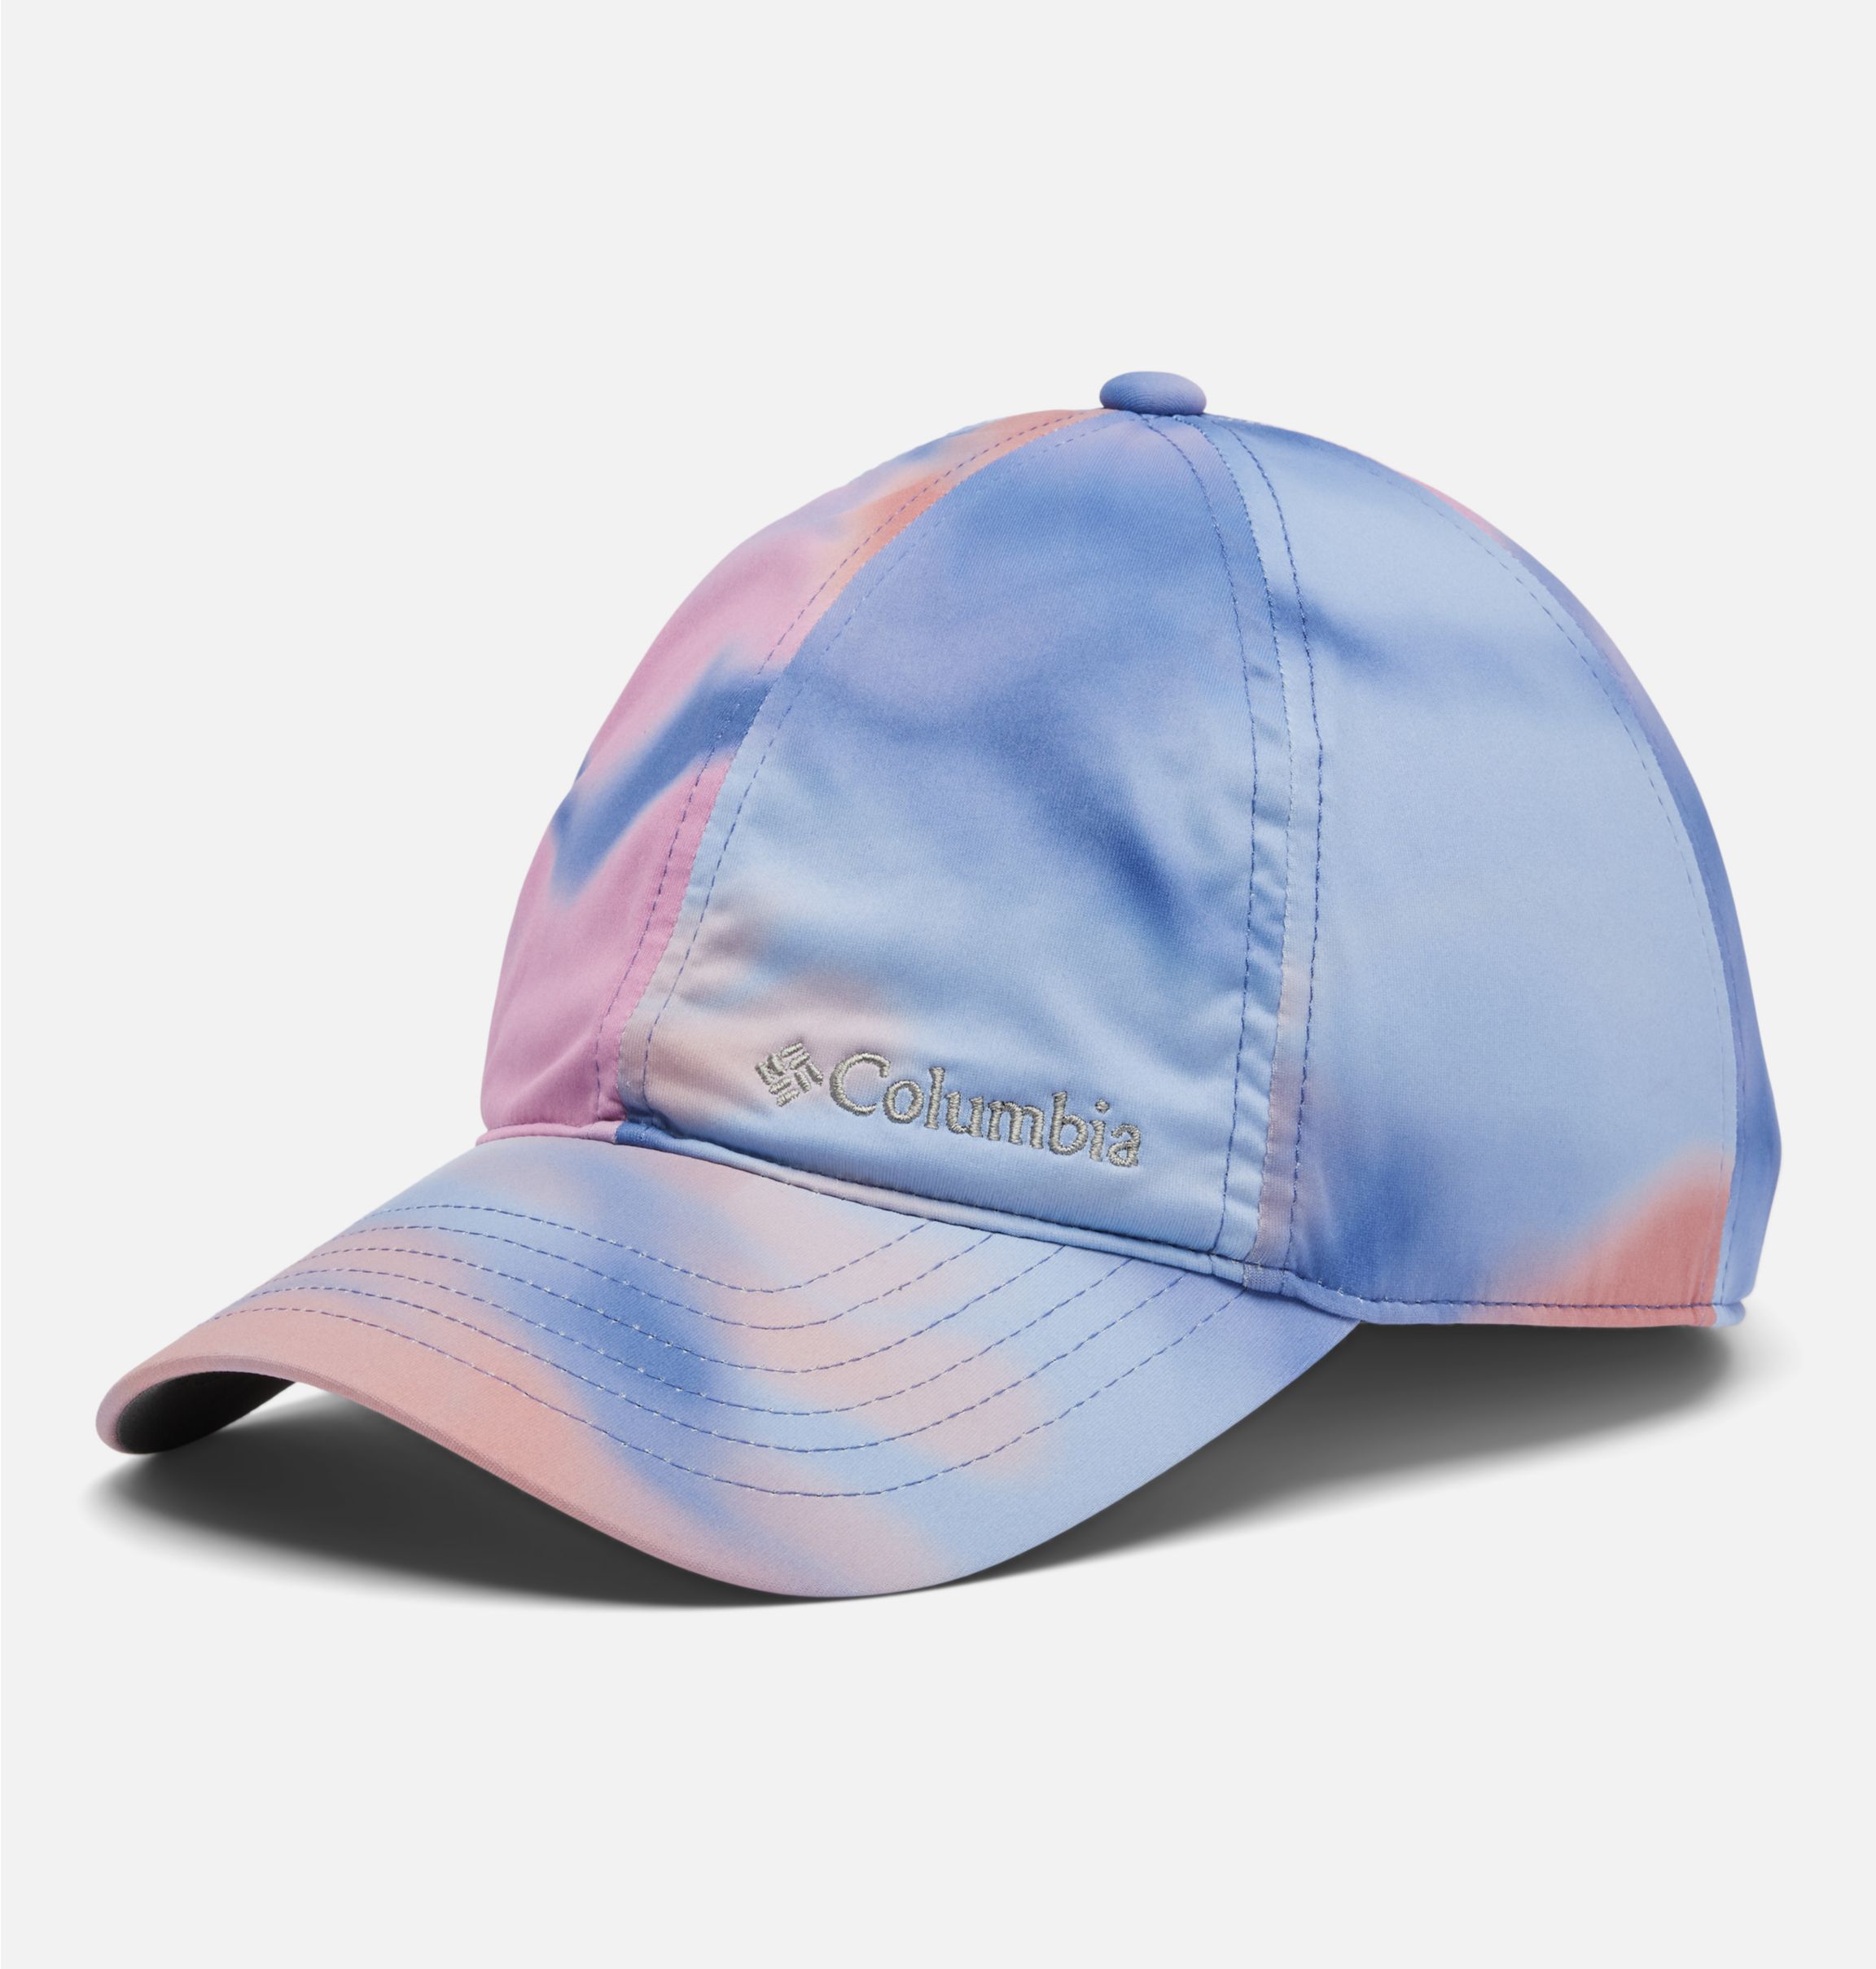 Columbia Accessories | Columbia Sportswear Twill Flex Fit Tech 110 Snap Back Ball Cap Hat unisex Nwt Os | Color: Blue/Pink | Size: Os | Daisysden's